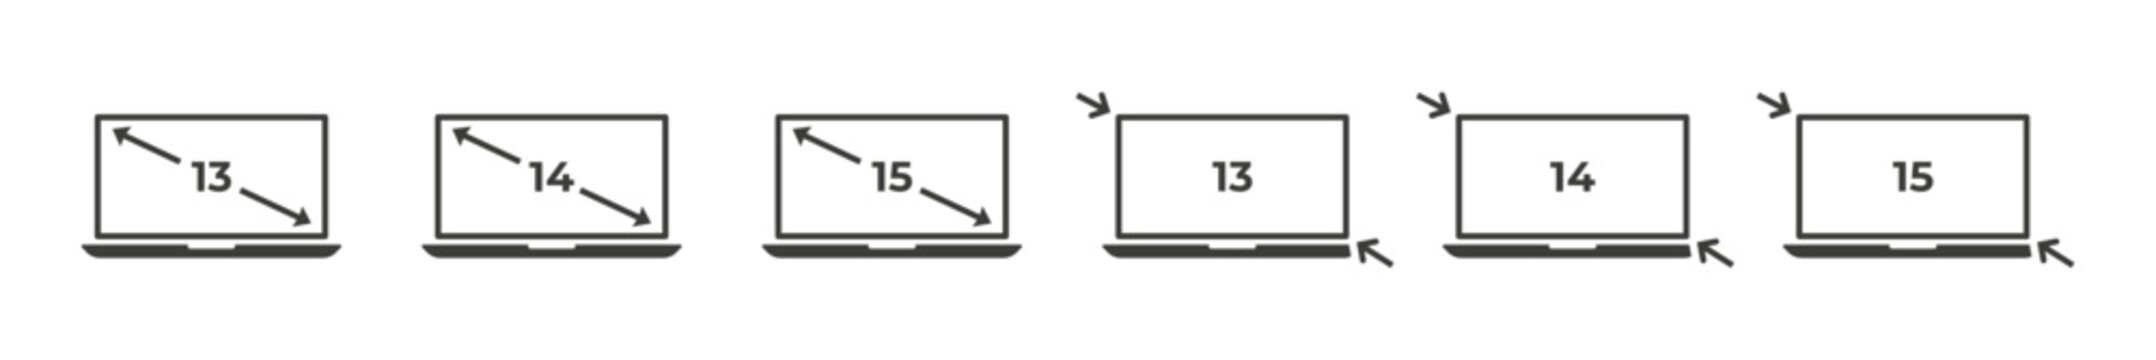 Laptop diagonal screen size. 13 14 15 inches screen size. Vector illustration.